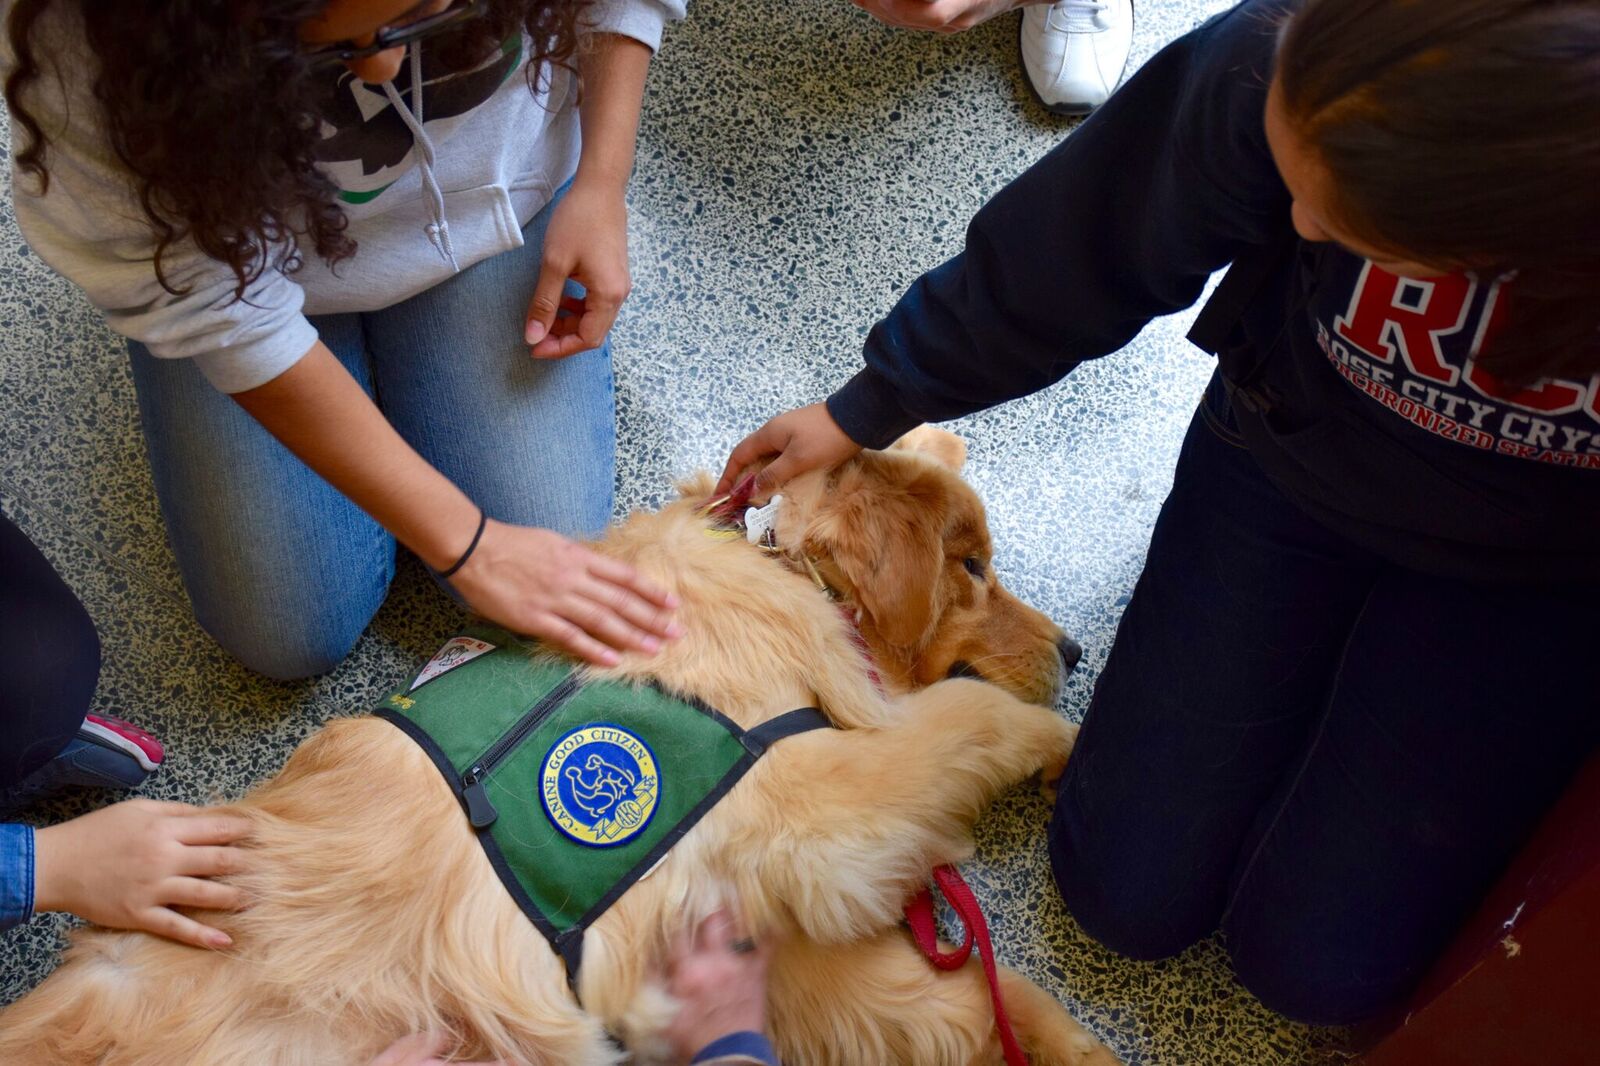 Students kneel on the floor while petting a dog with a vest that says, "Canine Good Citizen."